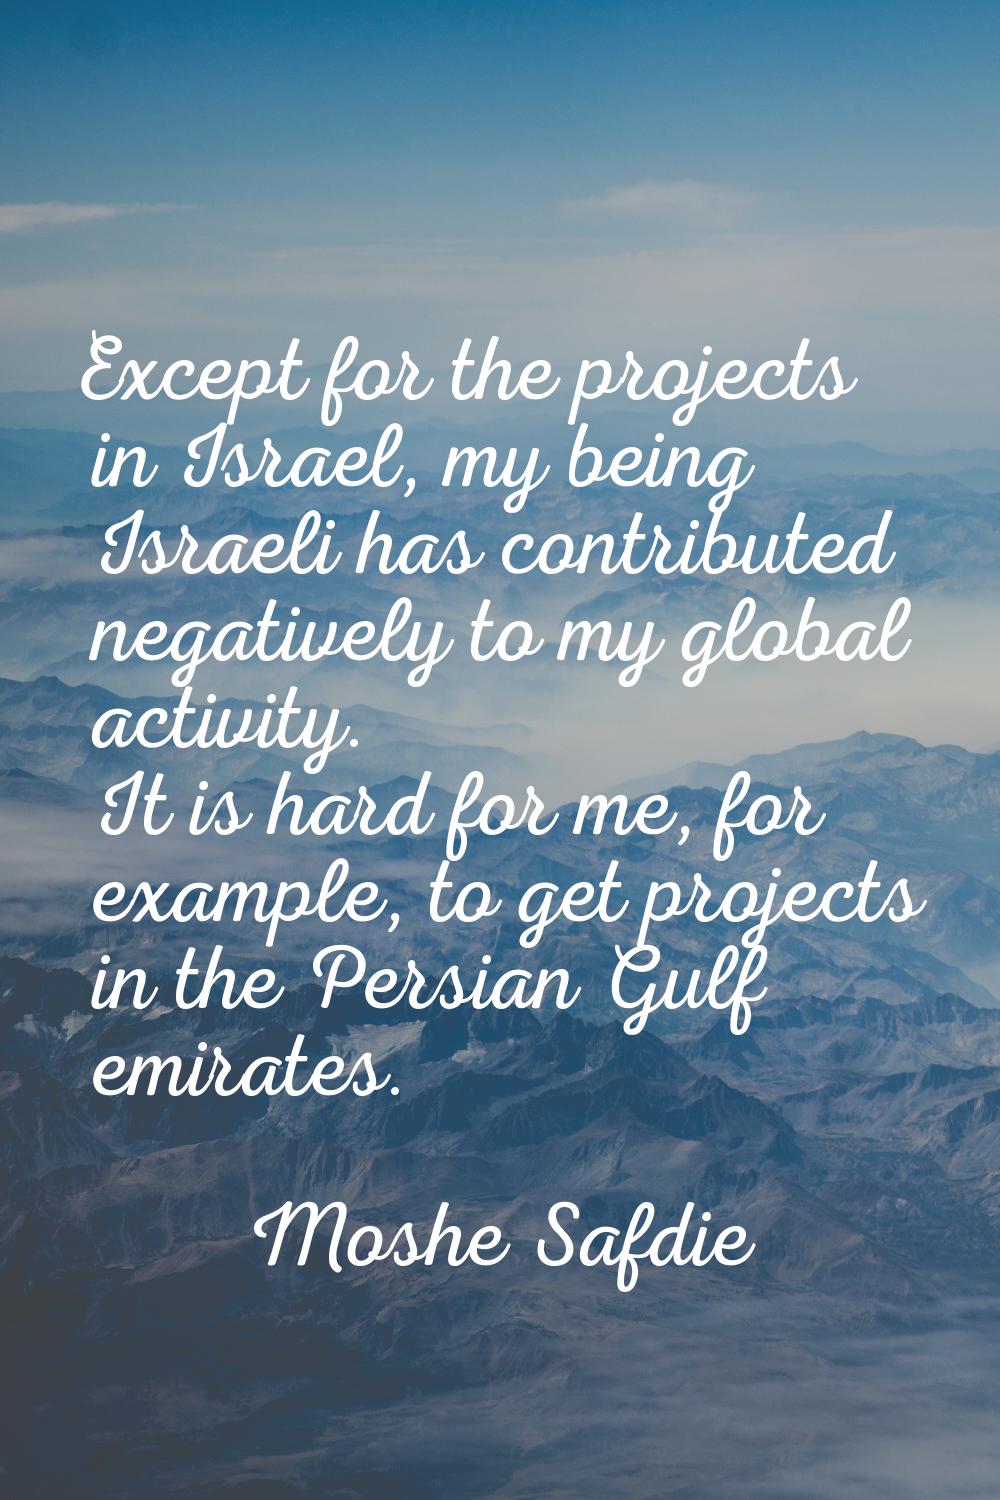 Except for the projects in Israel, my being Israeli has contributed negatively to my global activit